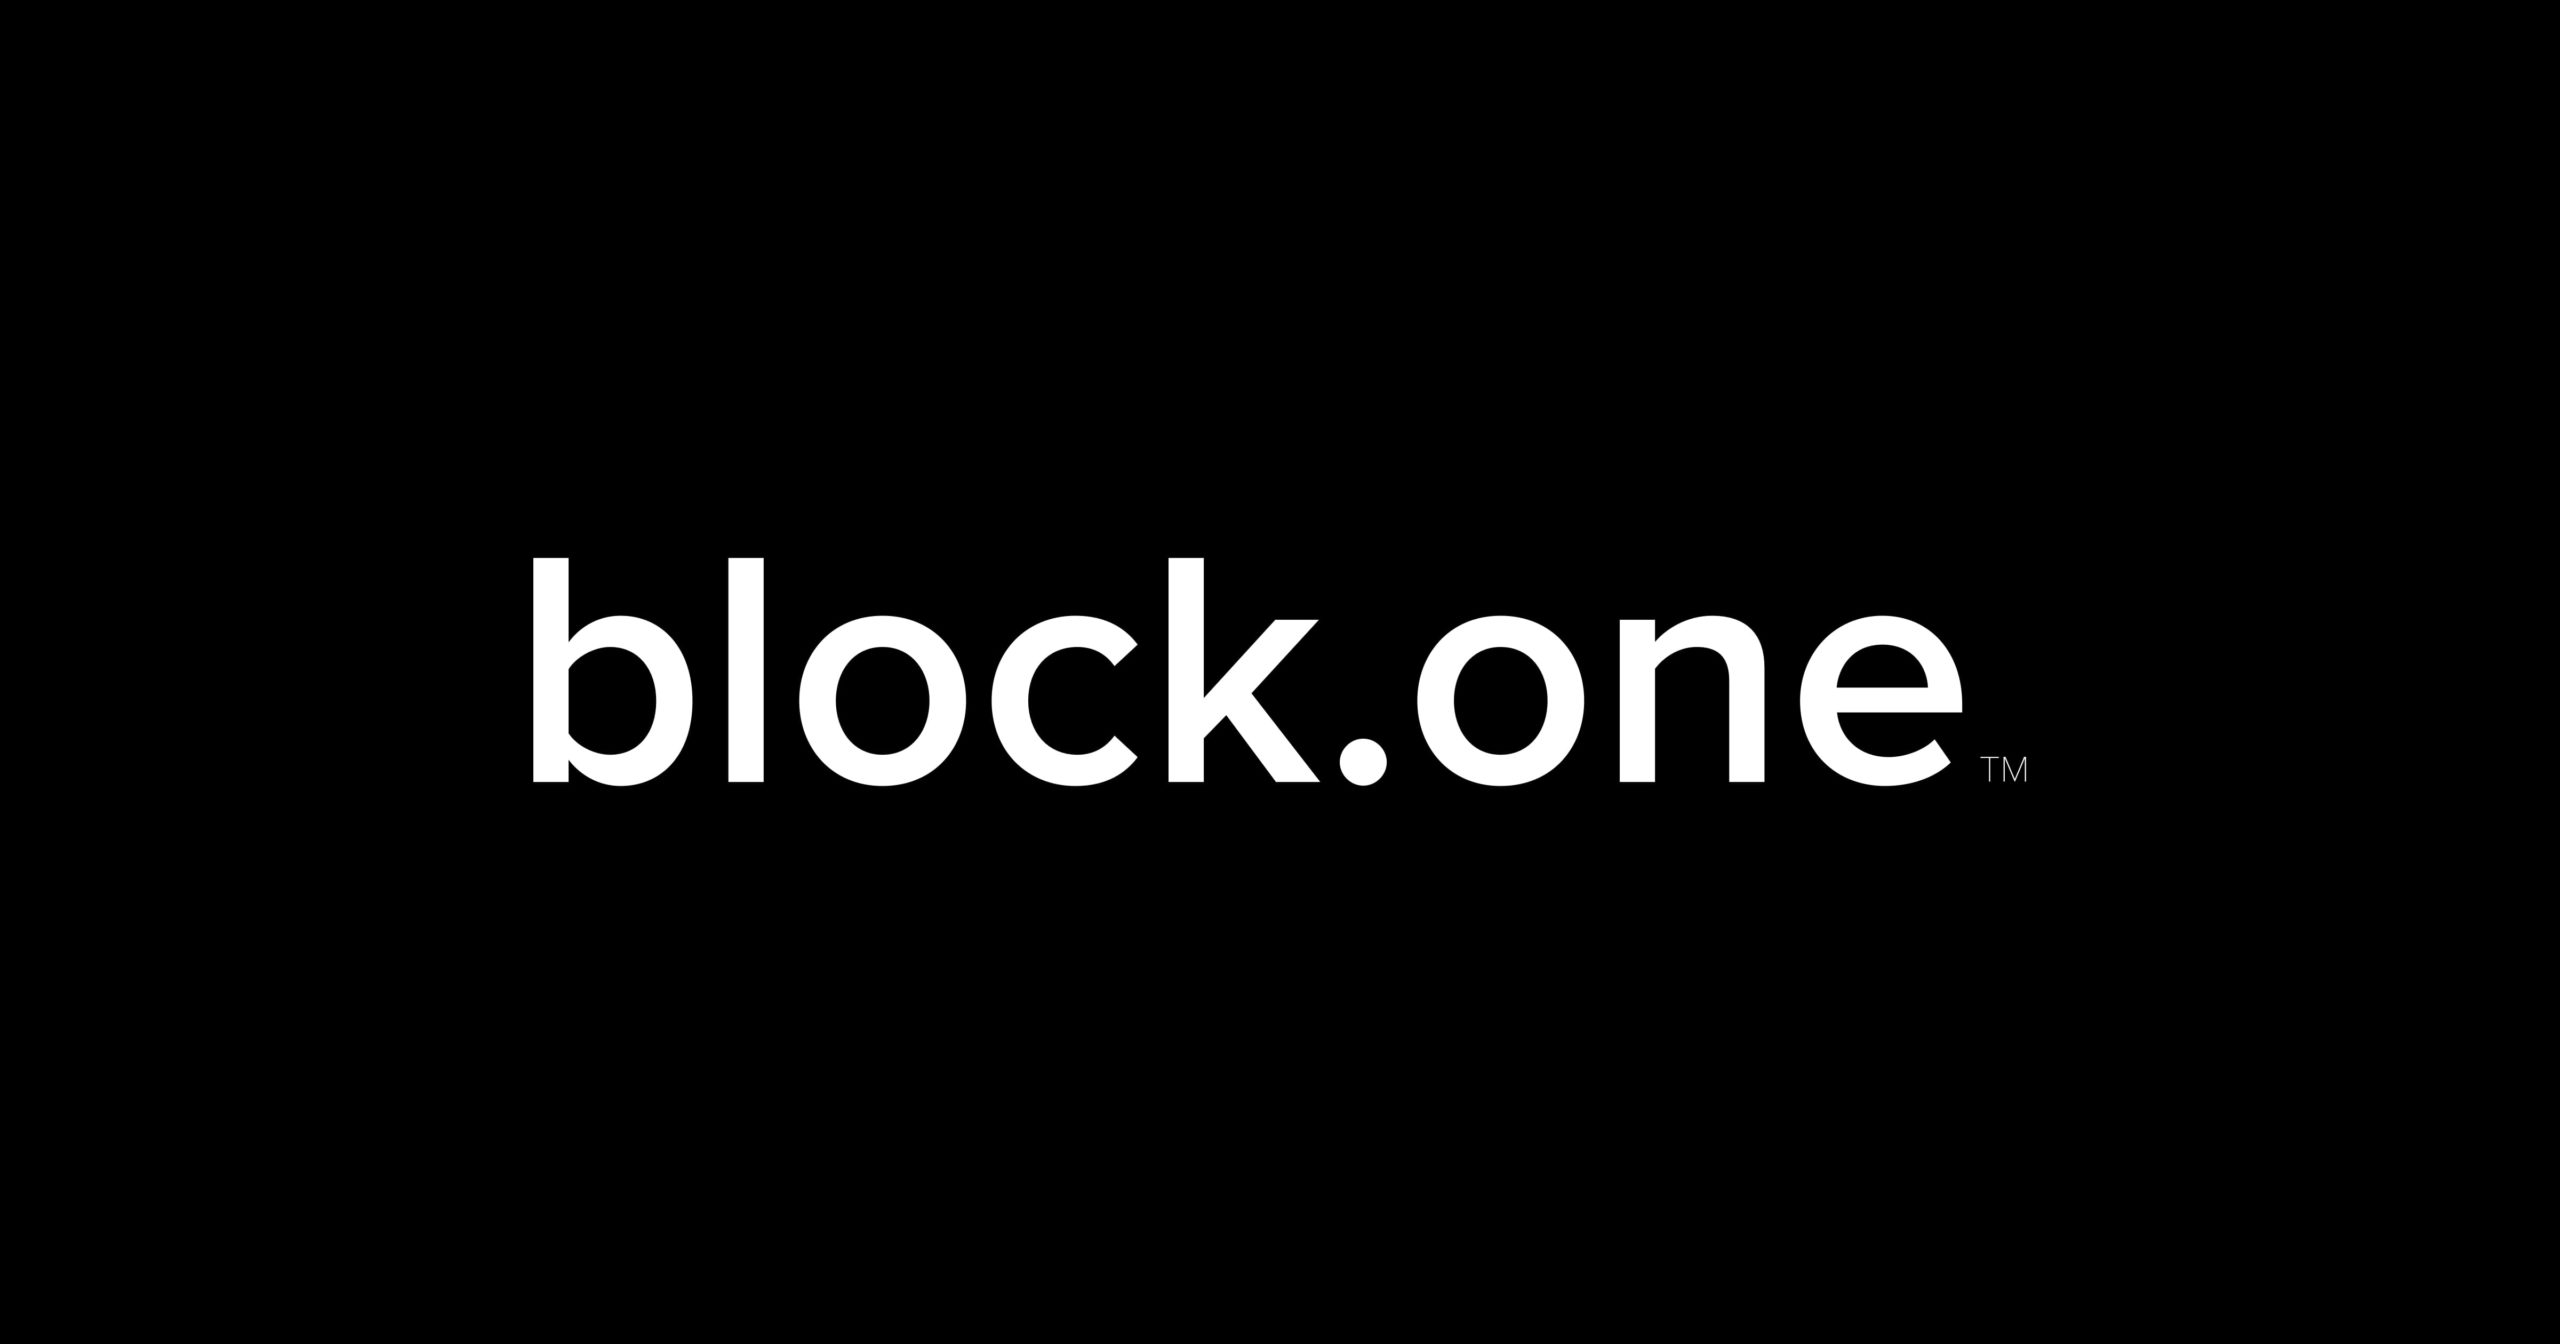 Block.One owns Bitcoins